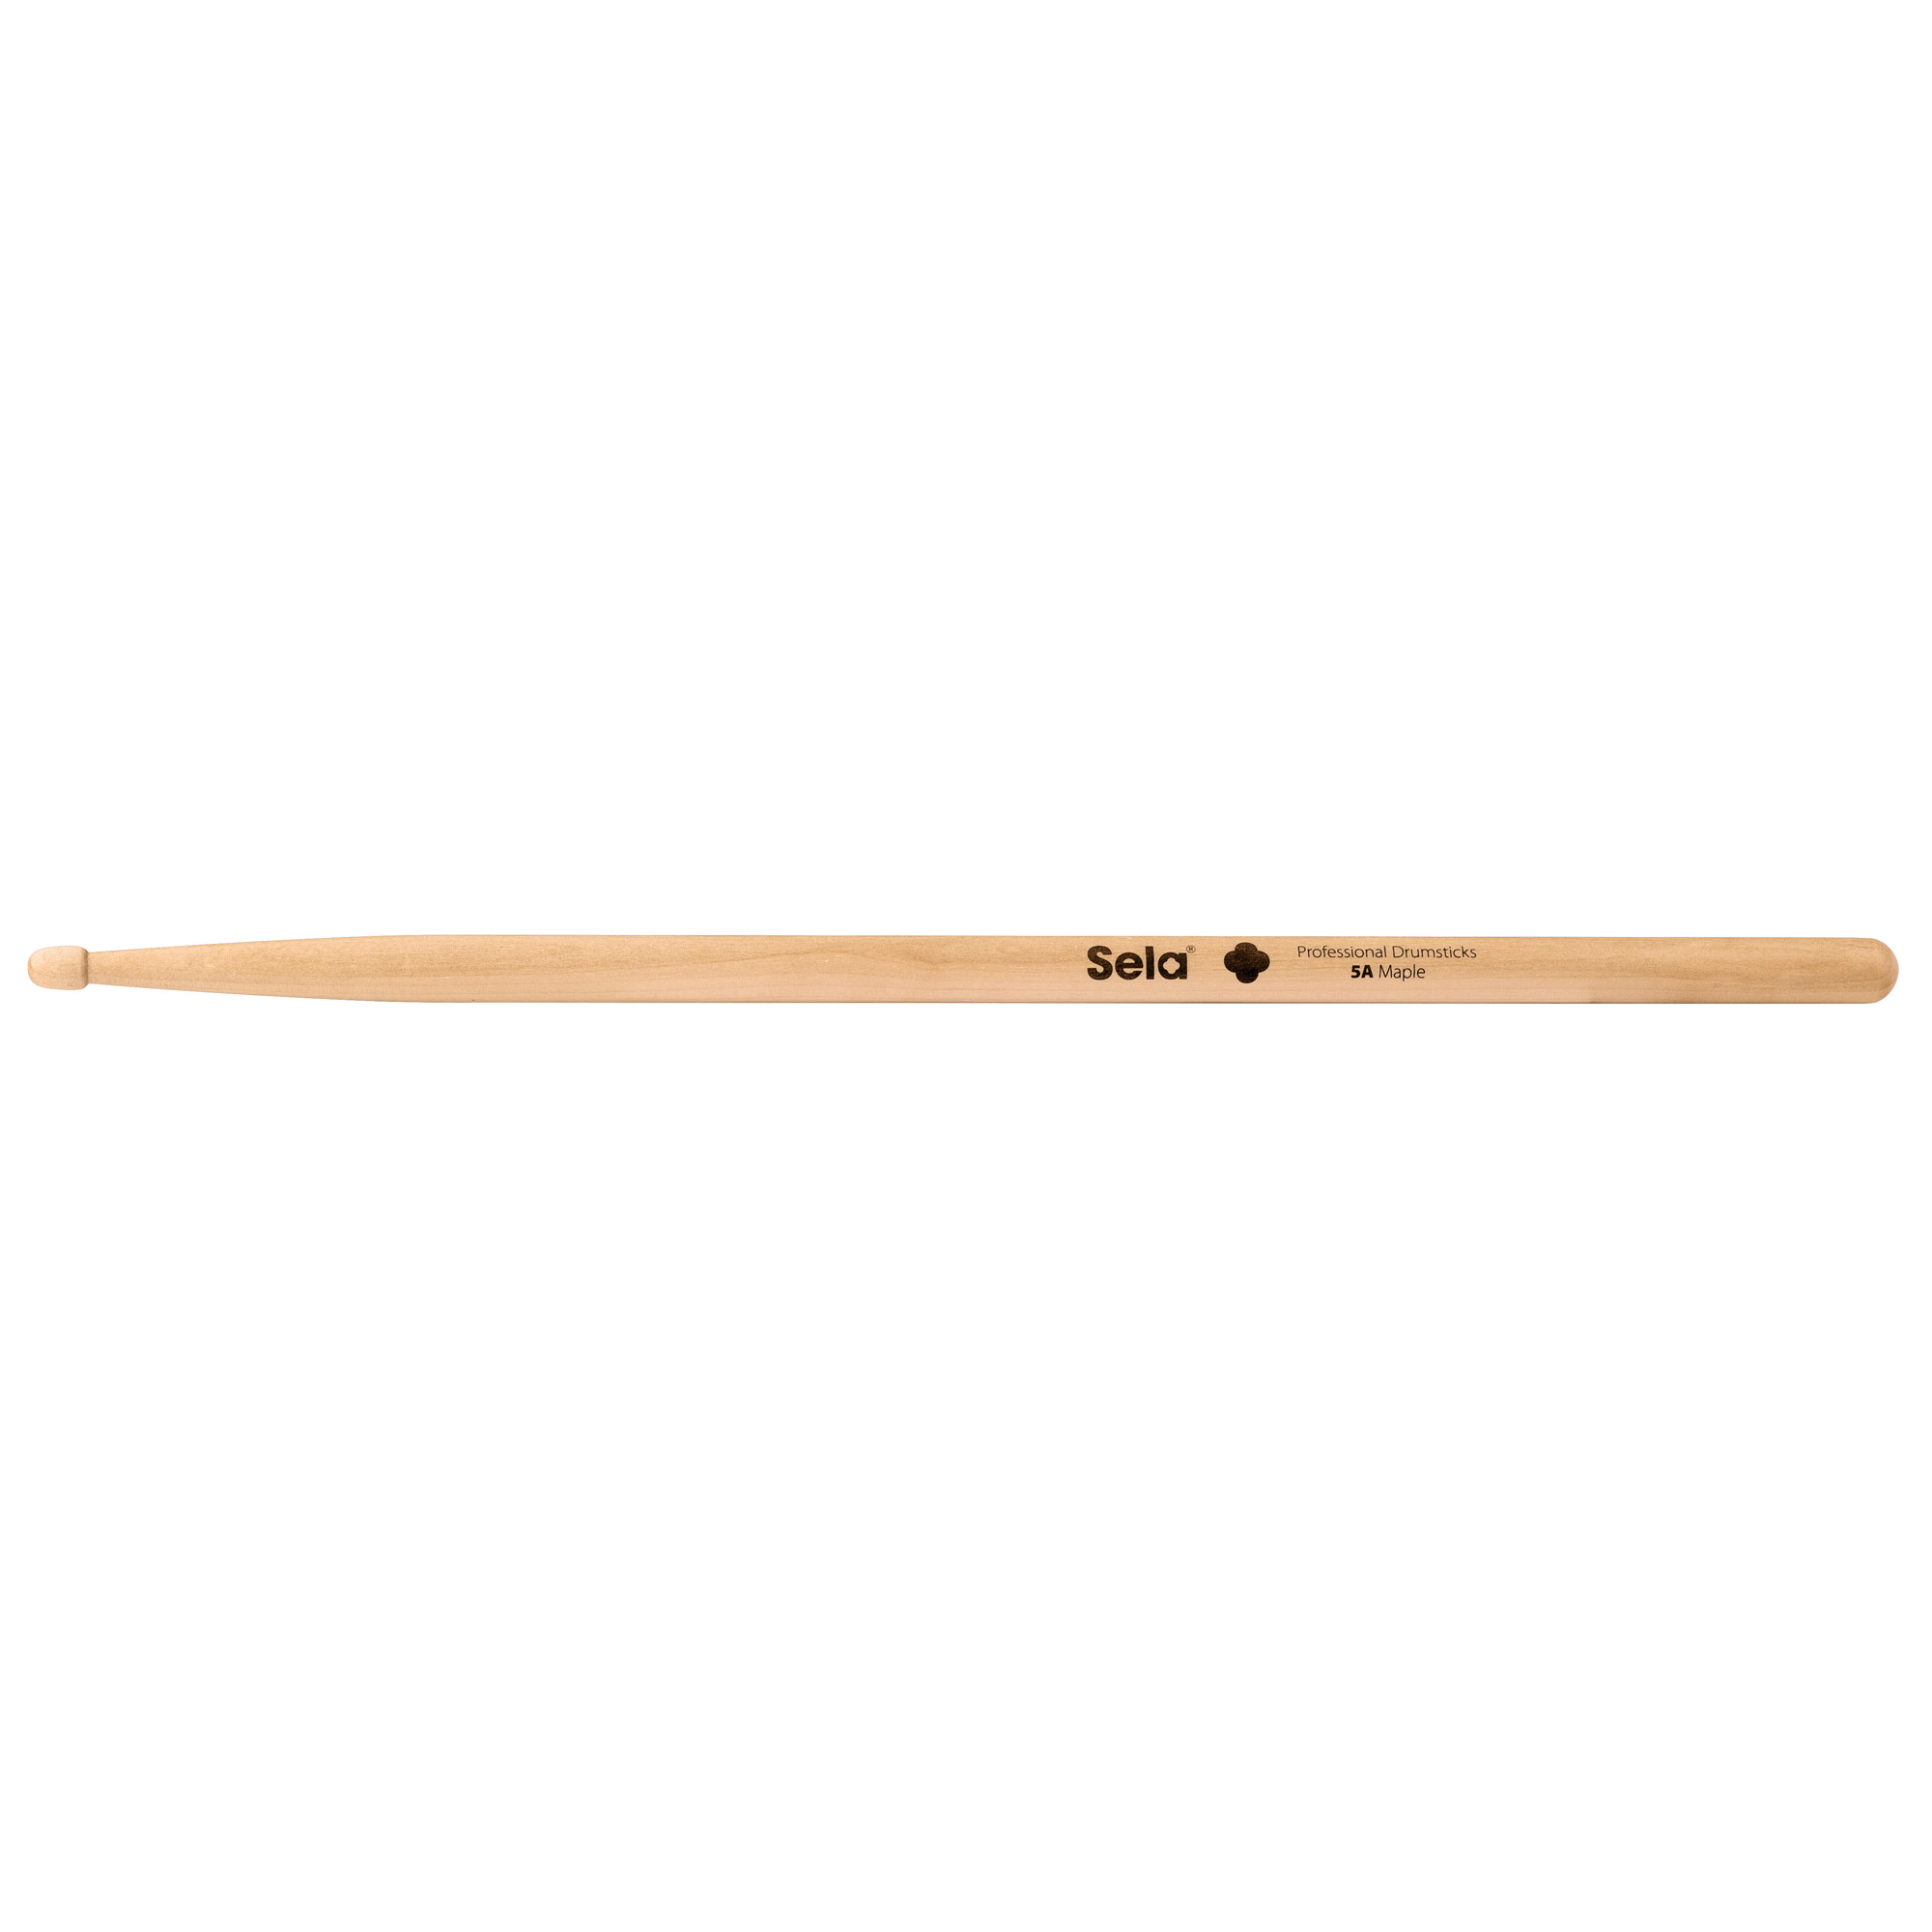 Professional Drumsticks 5A Maple Product Photos 2